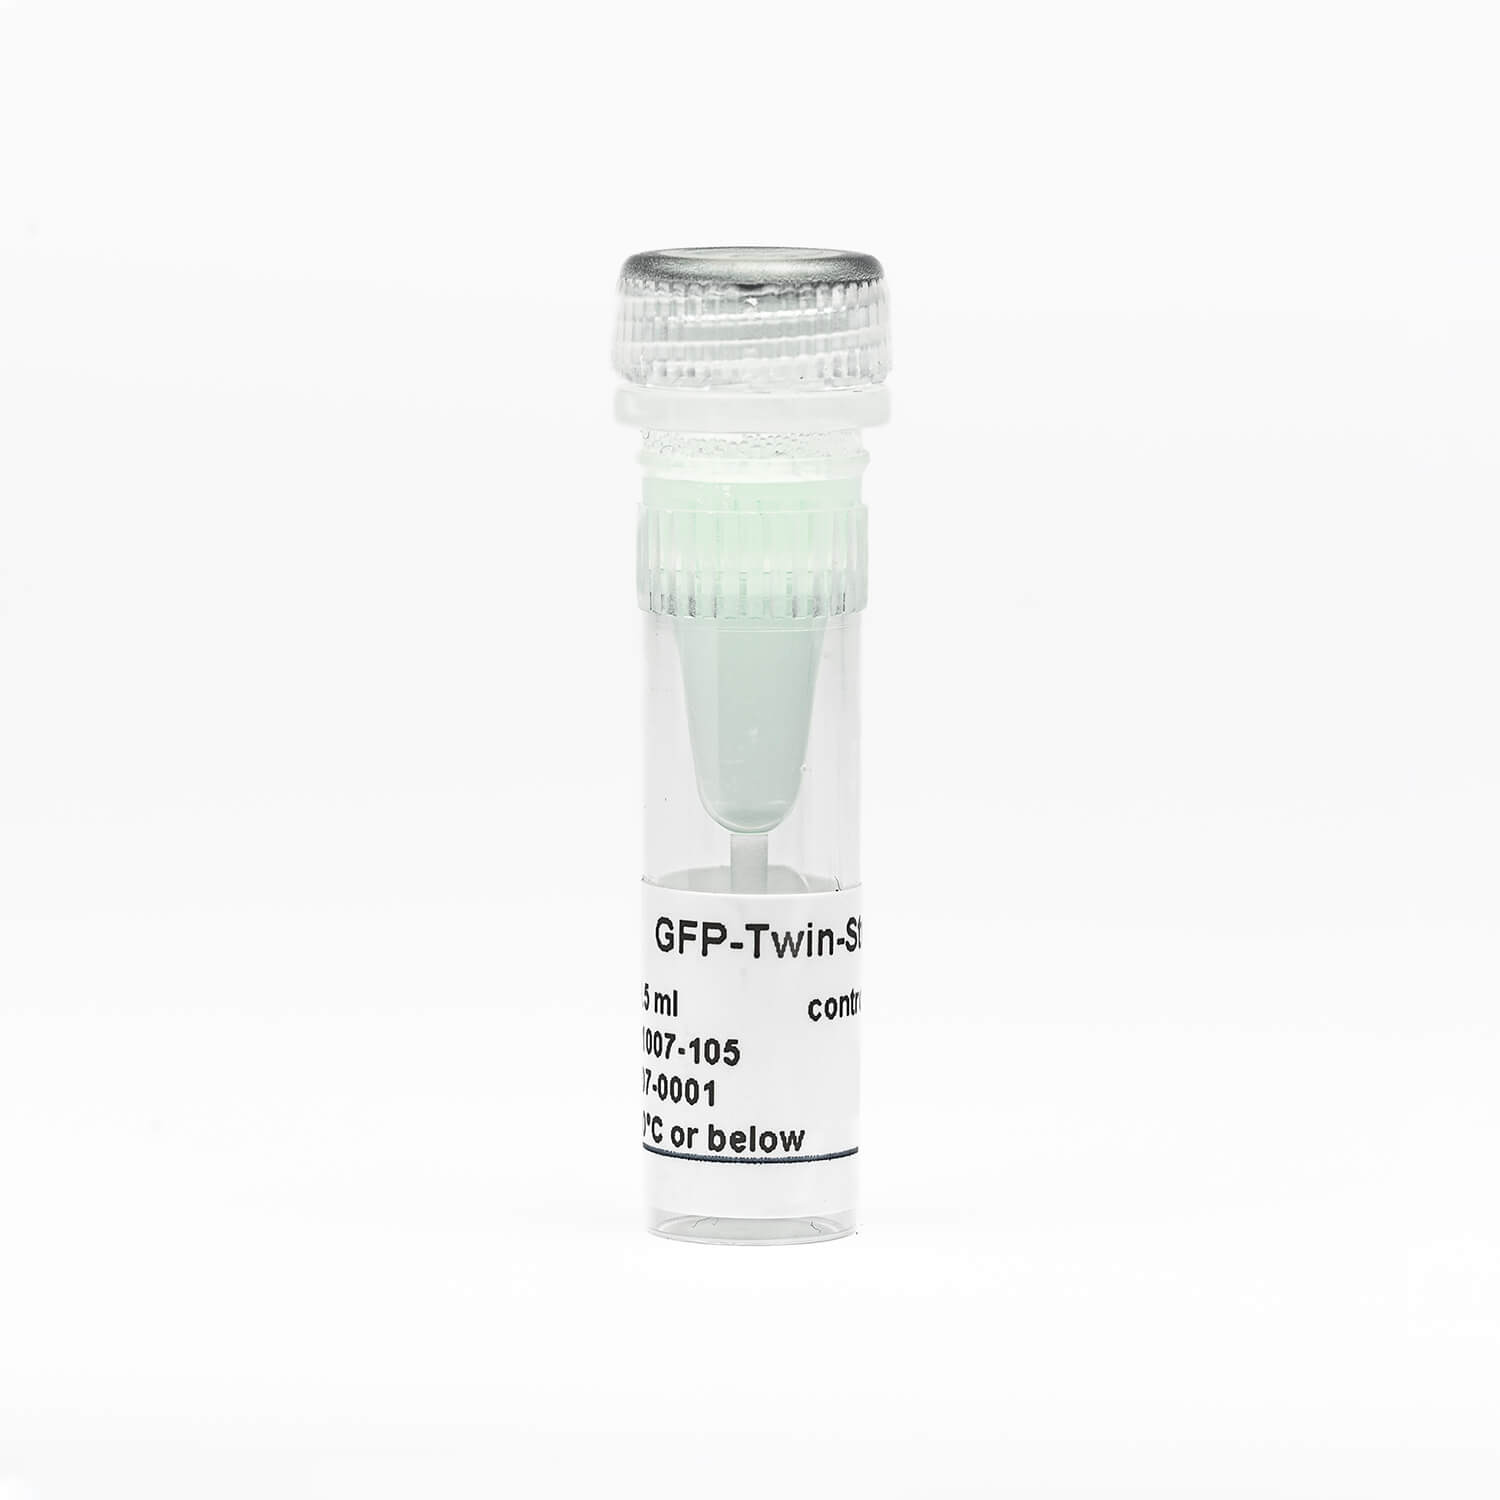 GFP-Twin-Strep-tag® control protein